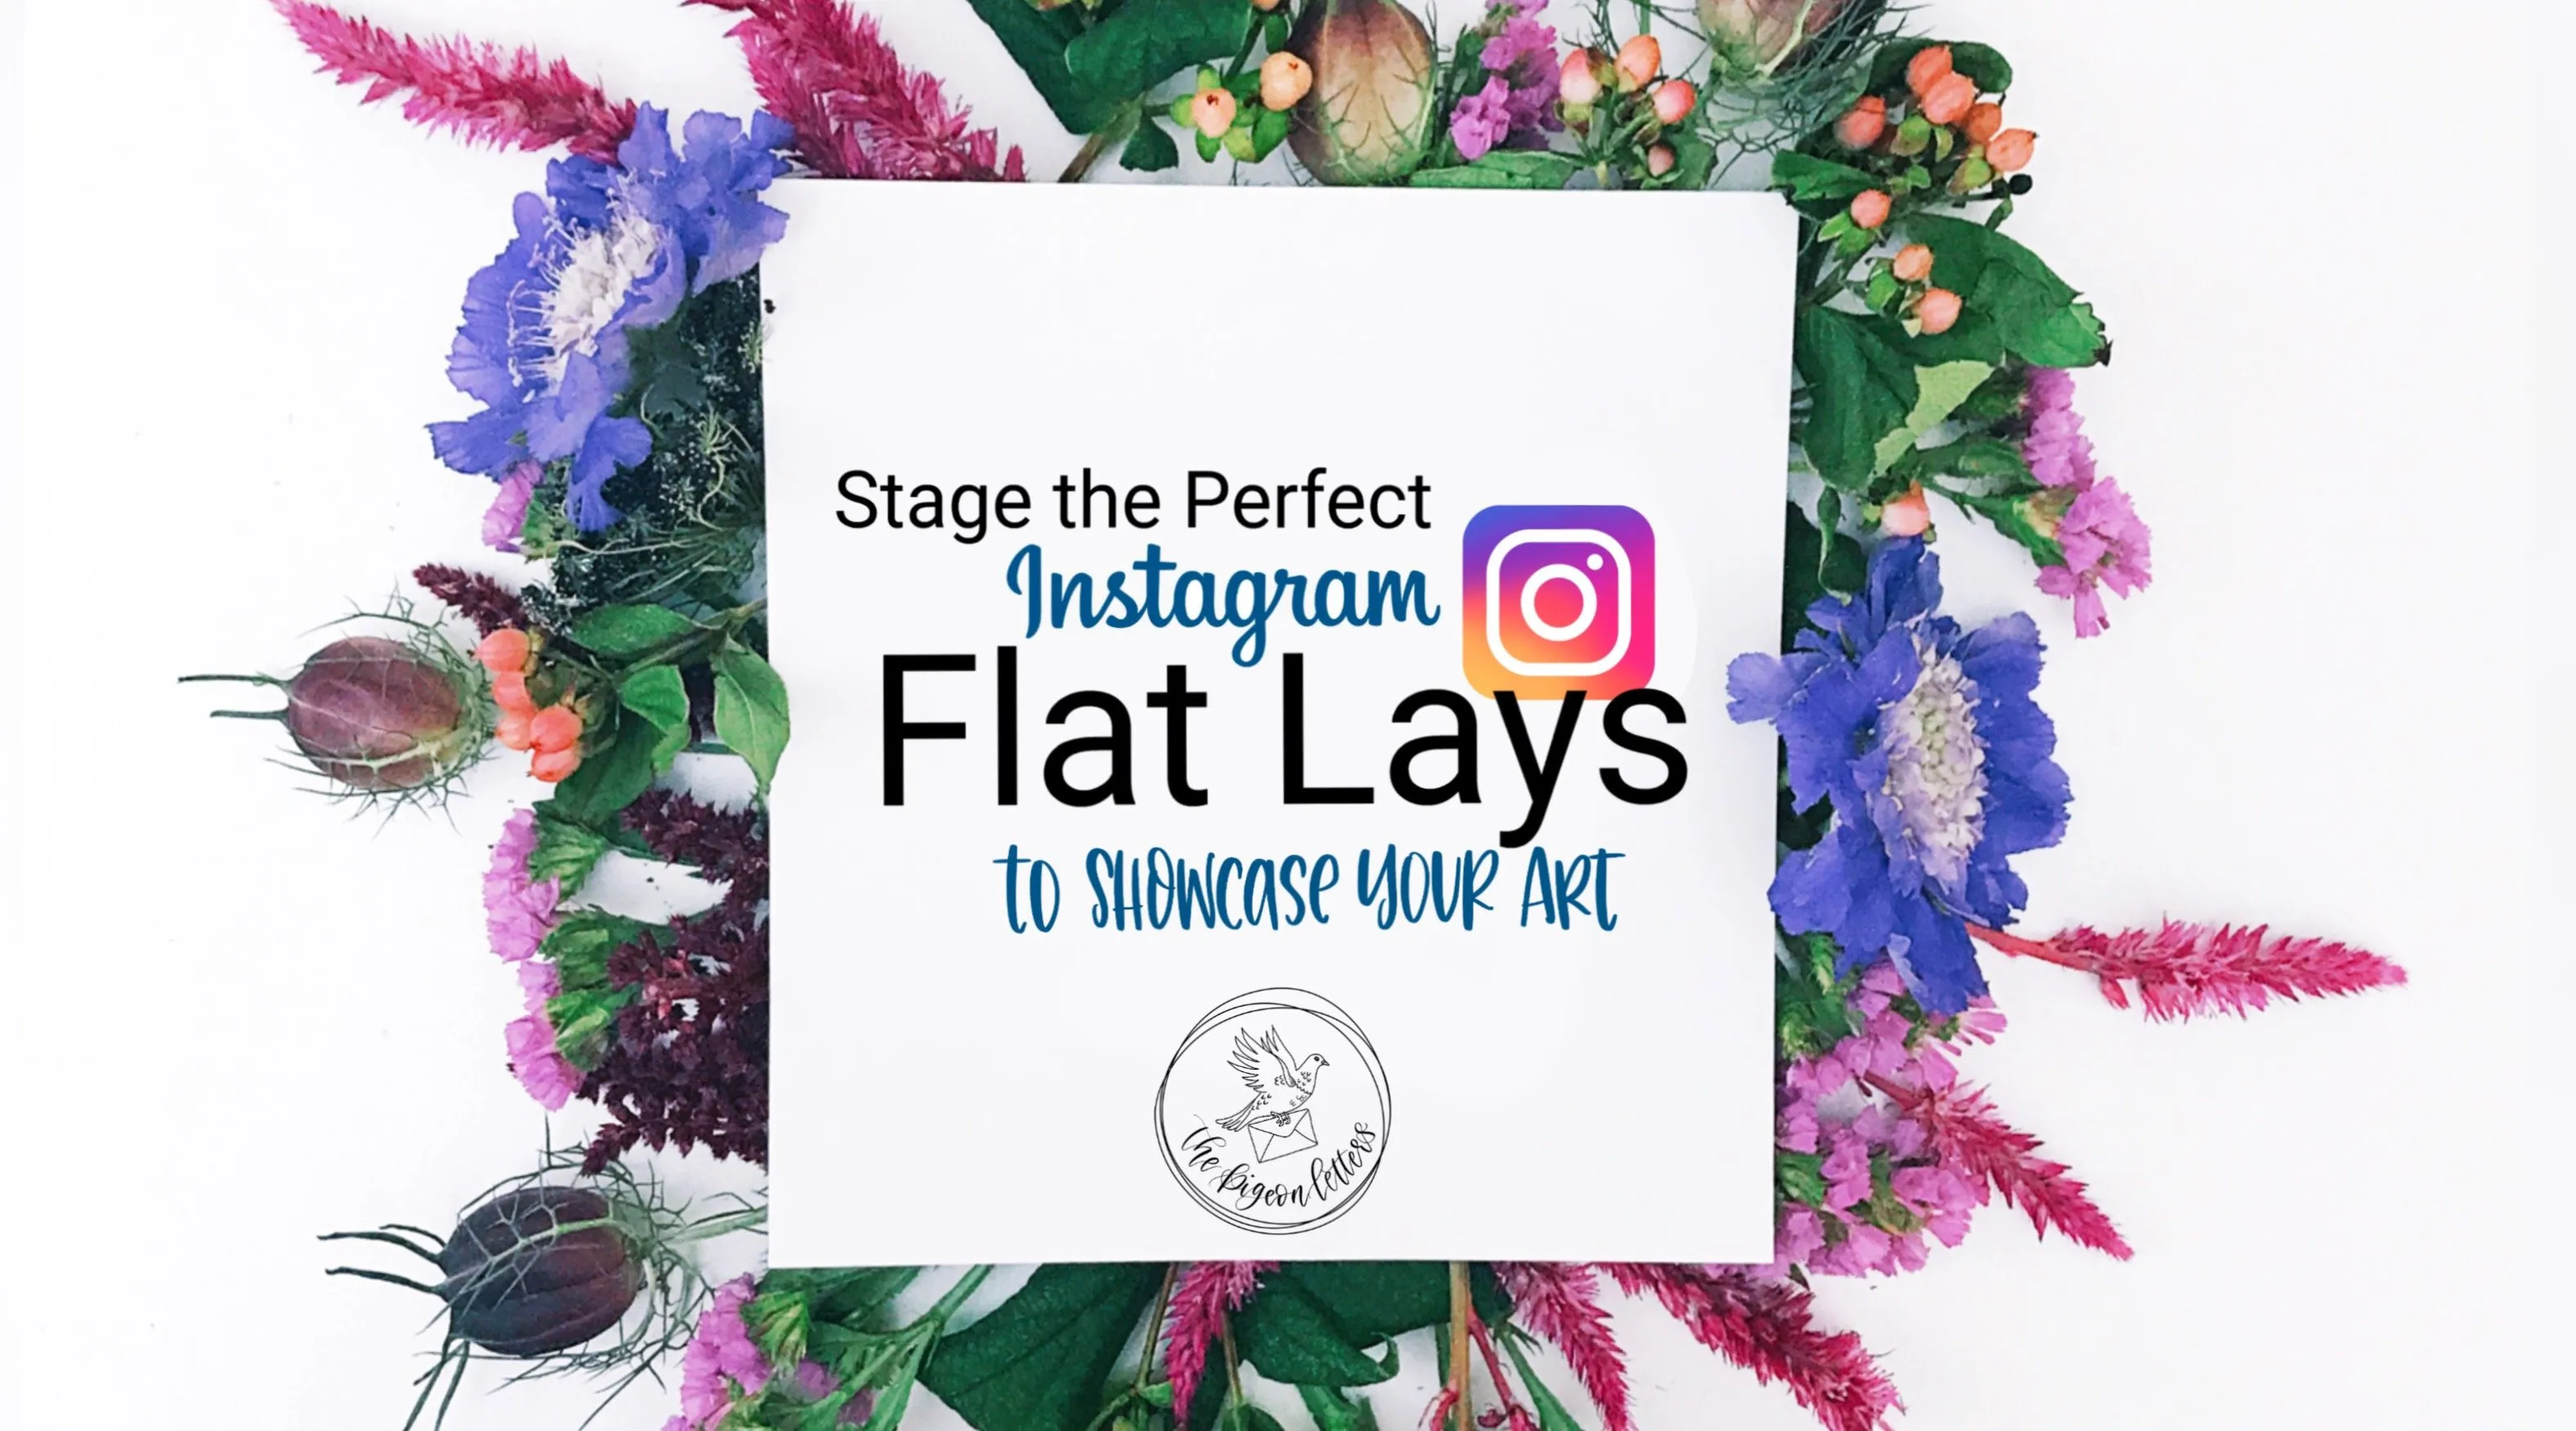 Stage the Perfect Instagram Flat Lays to Showcase Your Art